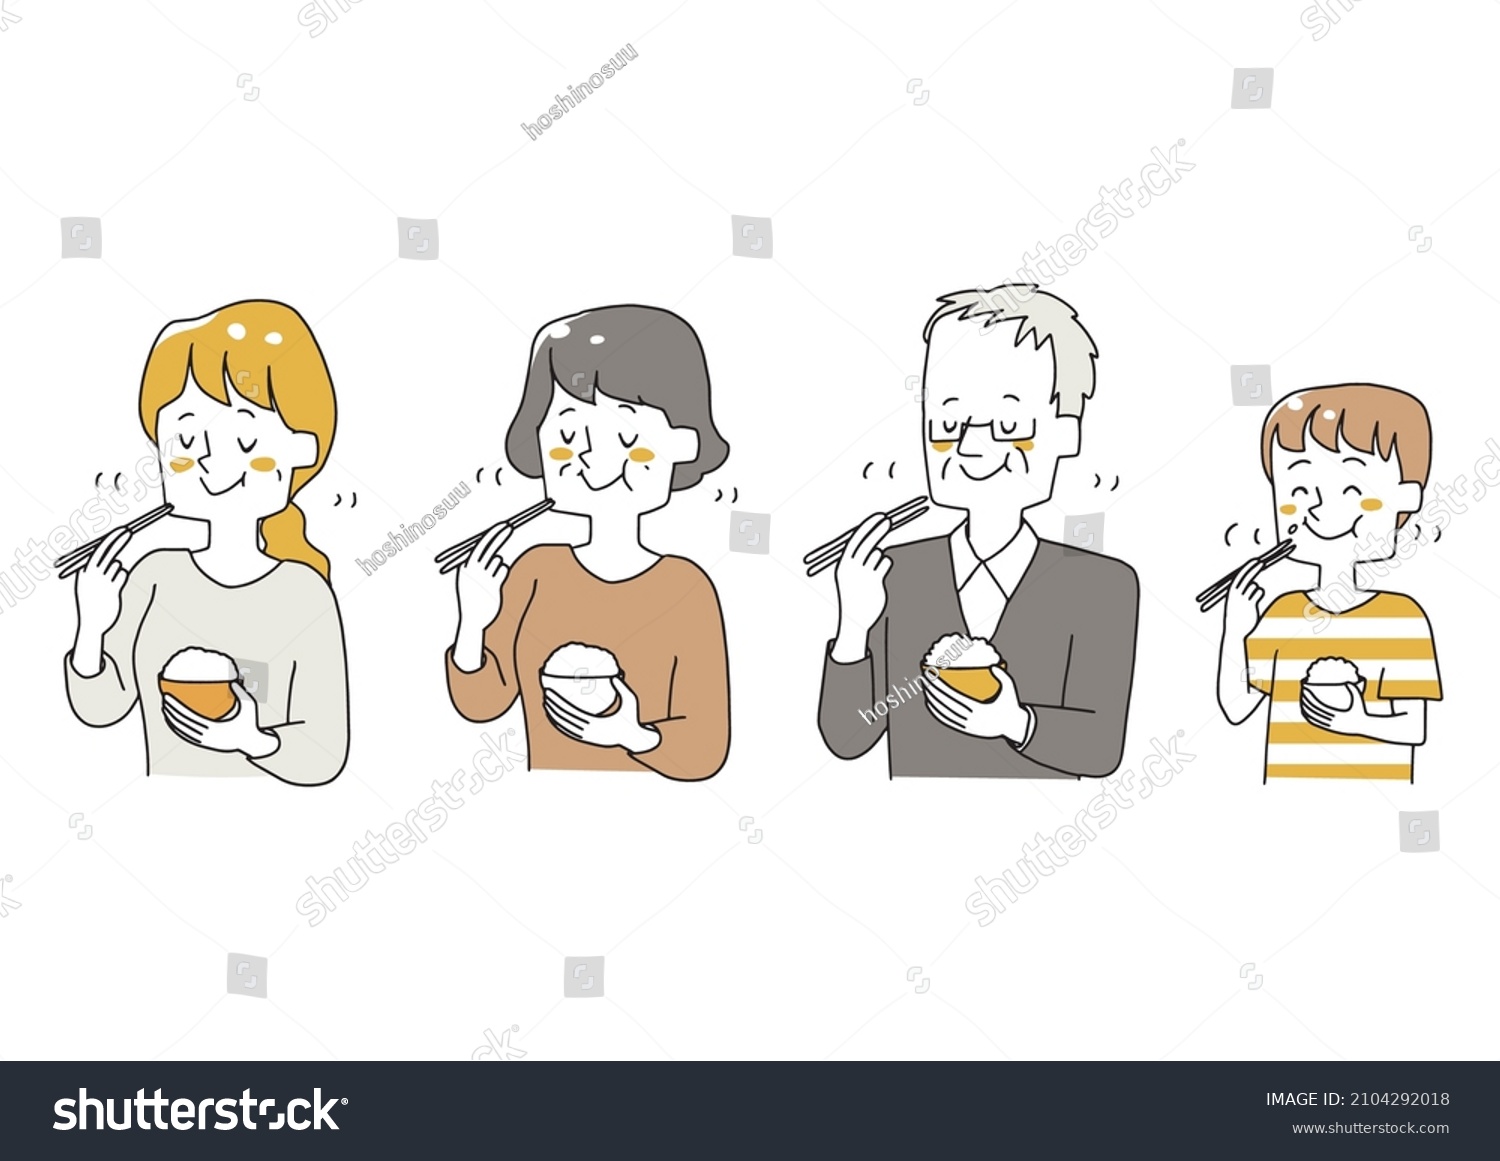 SVG of A set of people of various ages who chew well and eat. Warm hand-drawn person illustrations. svg